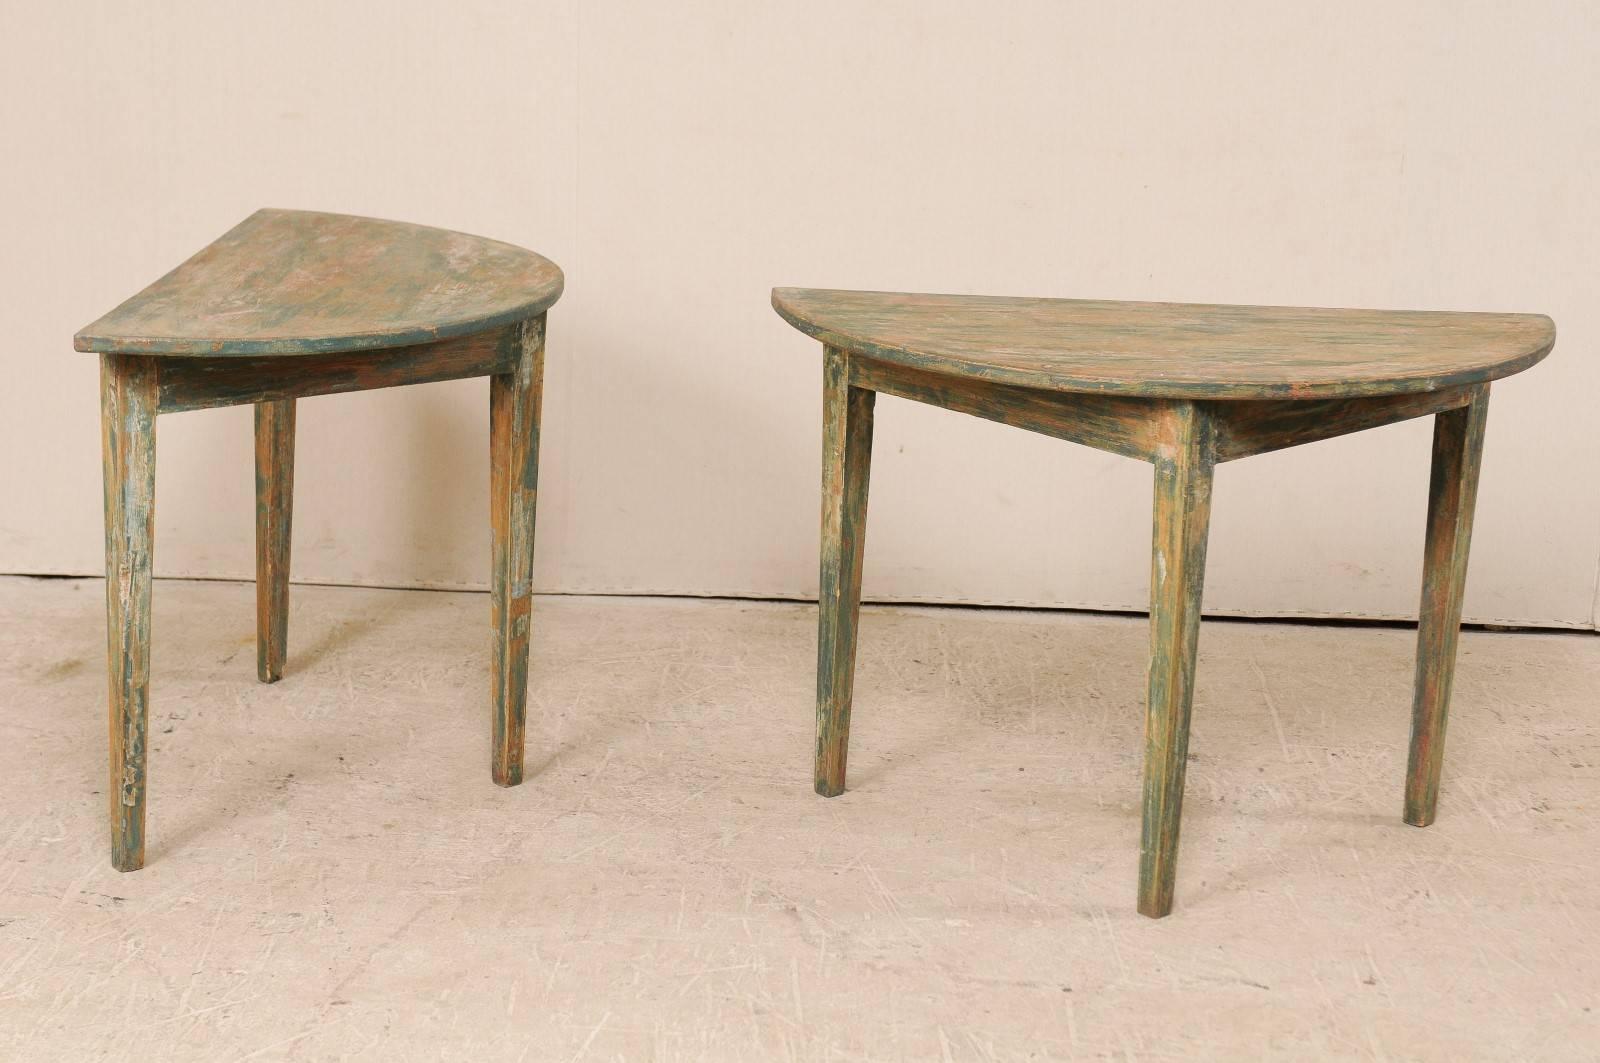 Pair of Painted Wood Swedish Demilune Tables with Traces of Original Paint 1